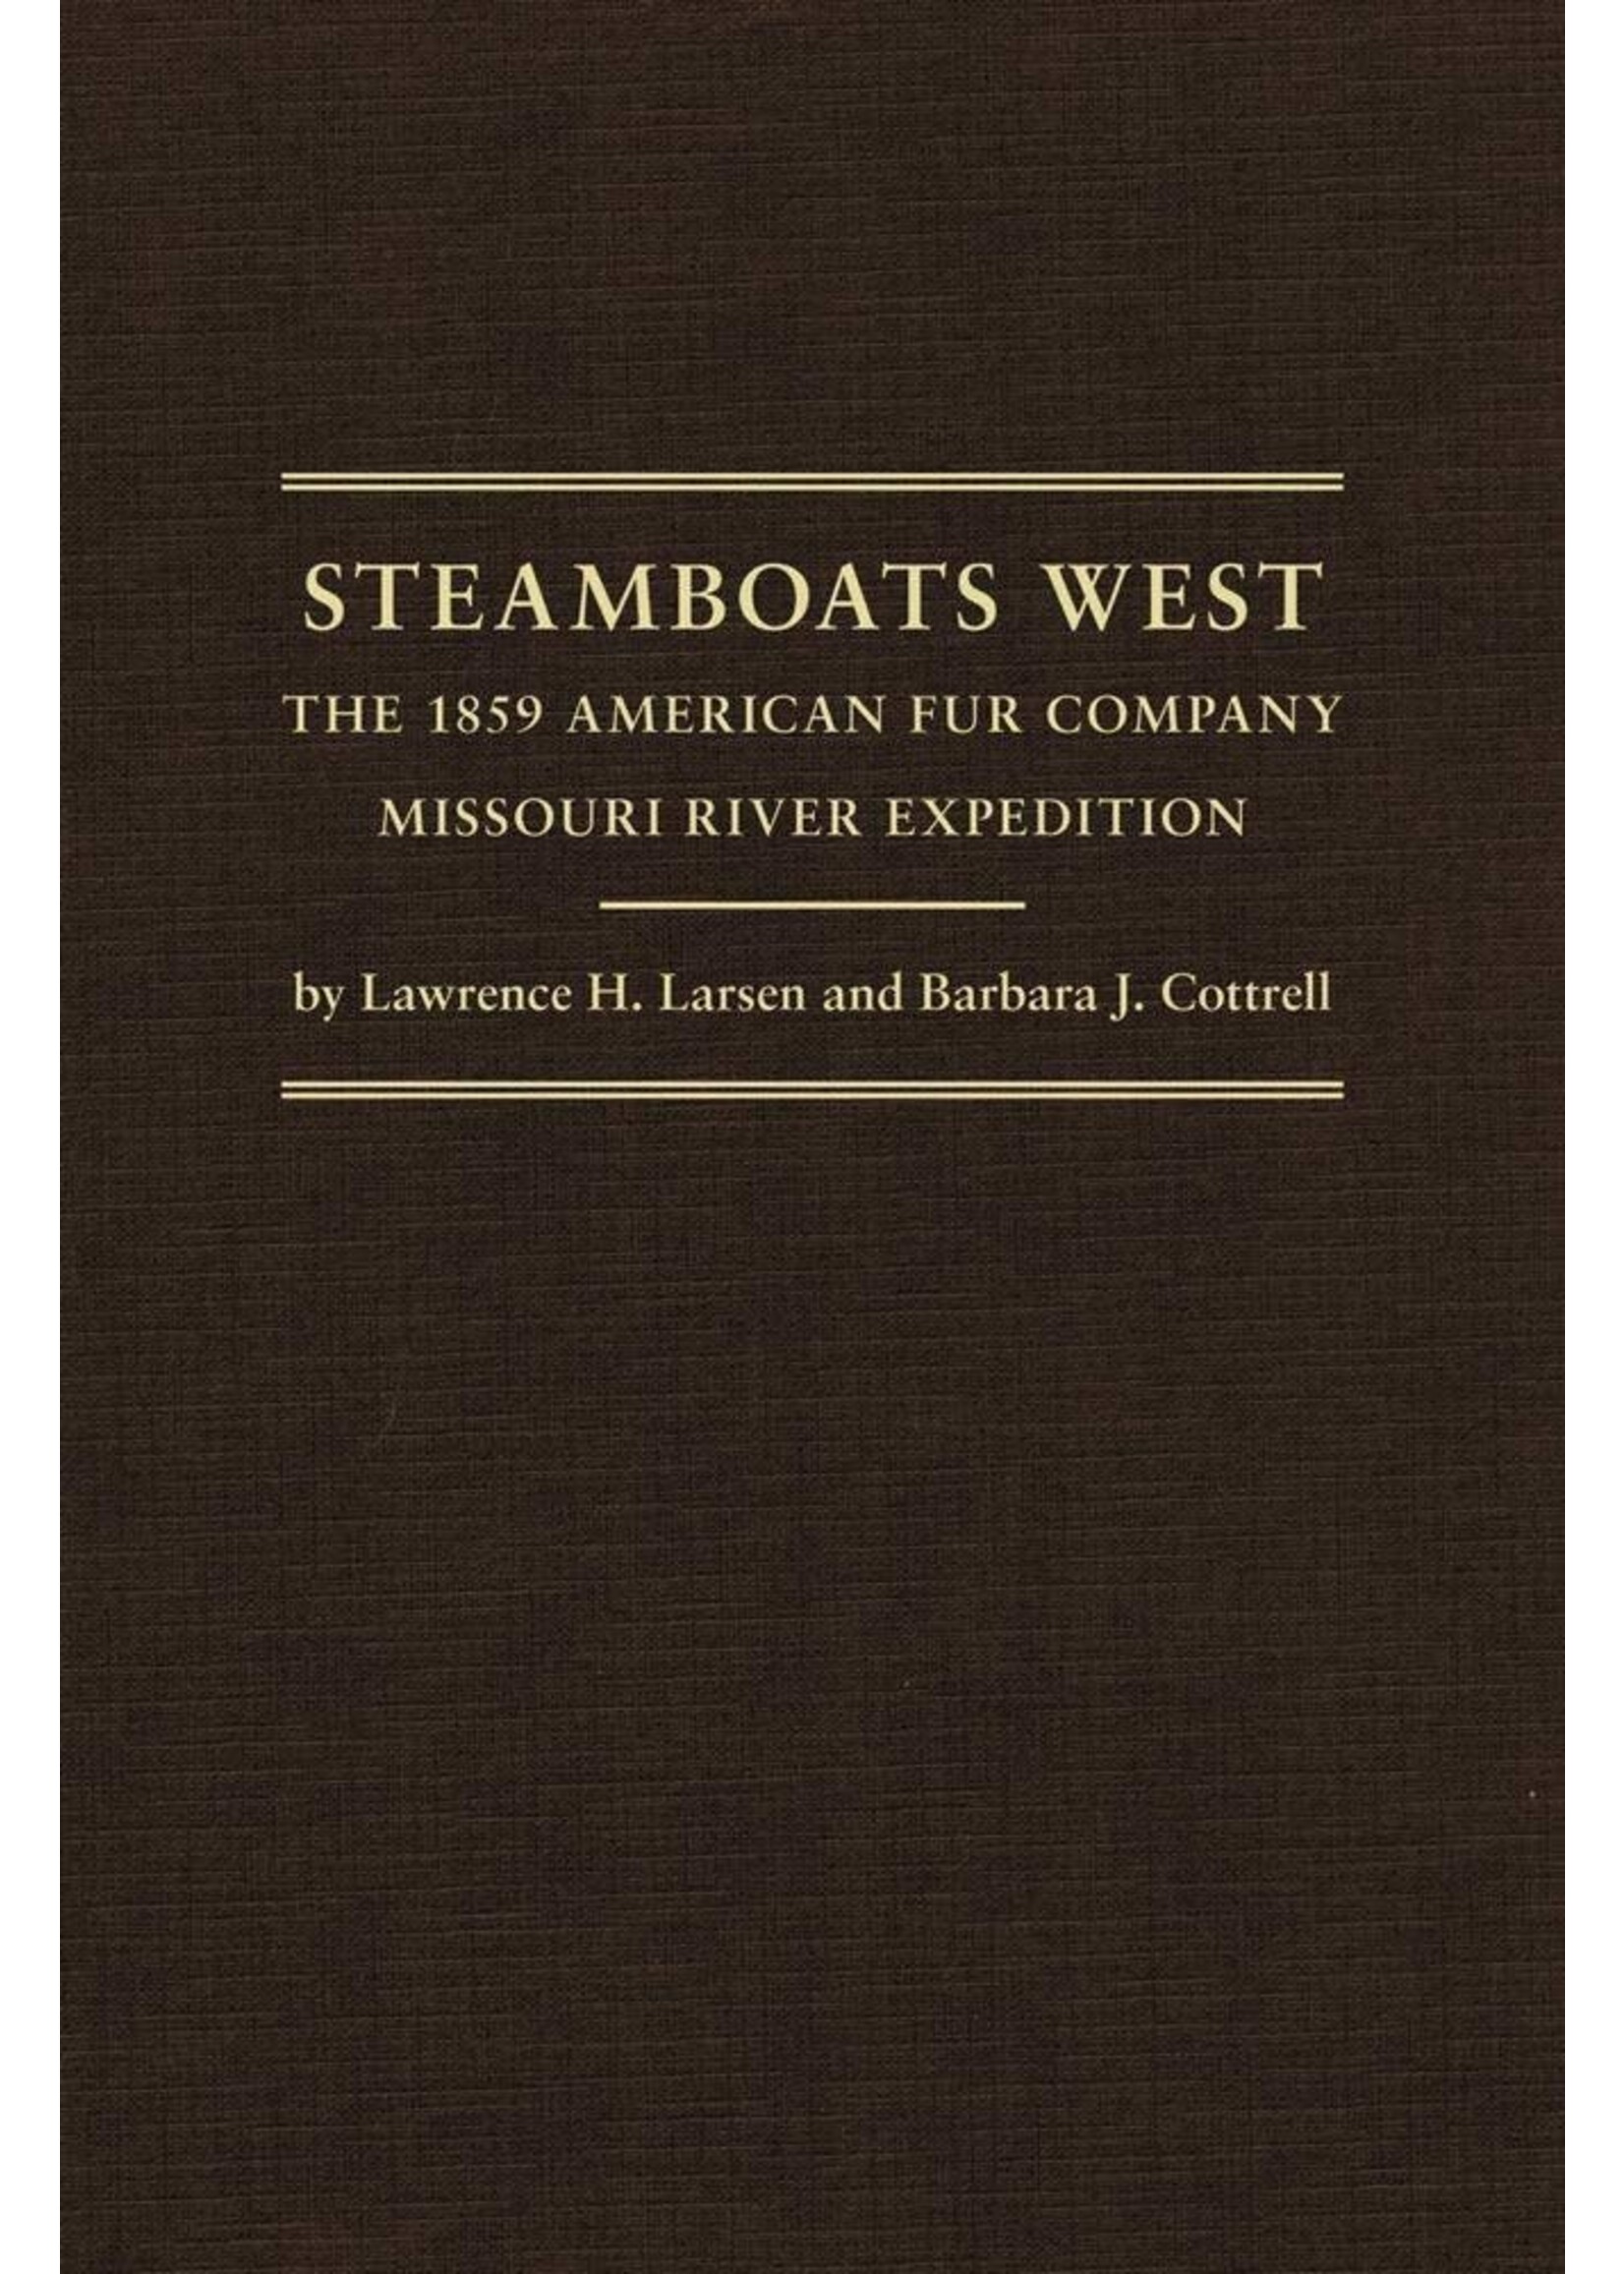 Steamboats West: The 1859 American Fur Company Missouri River Expedition